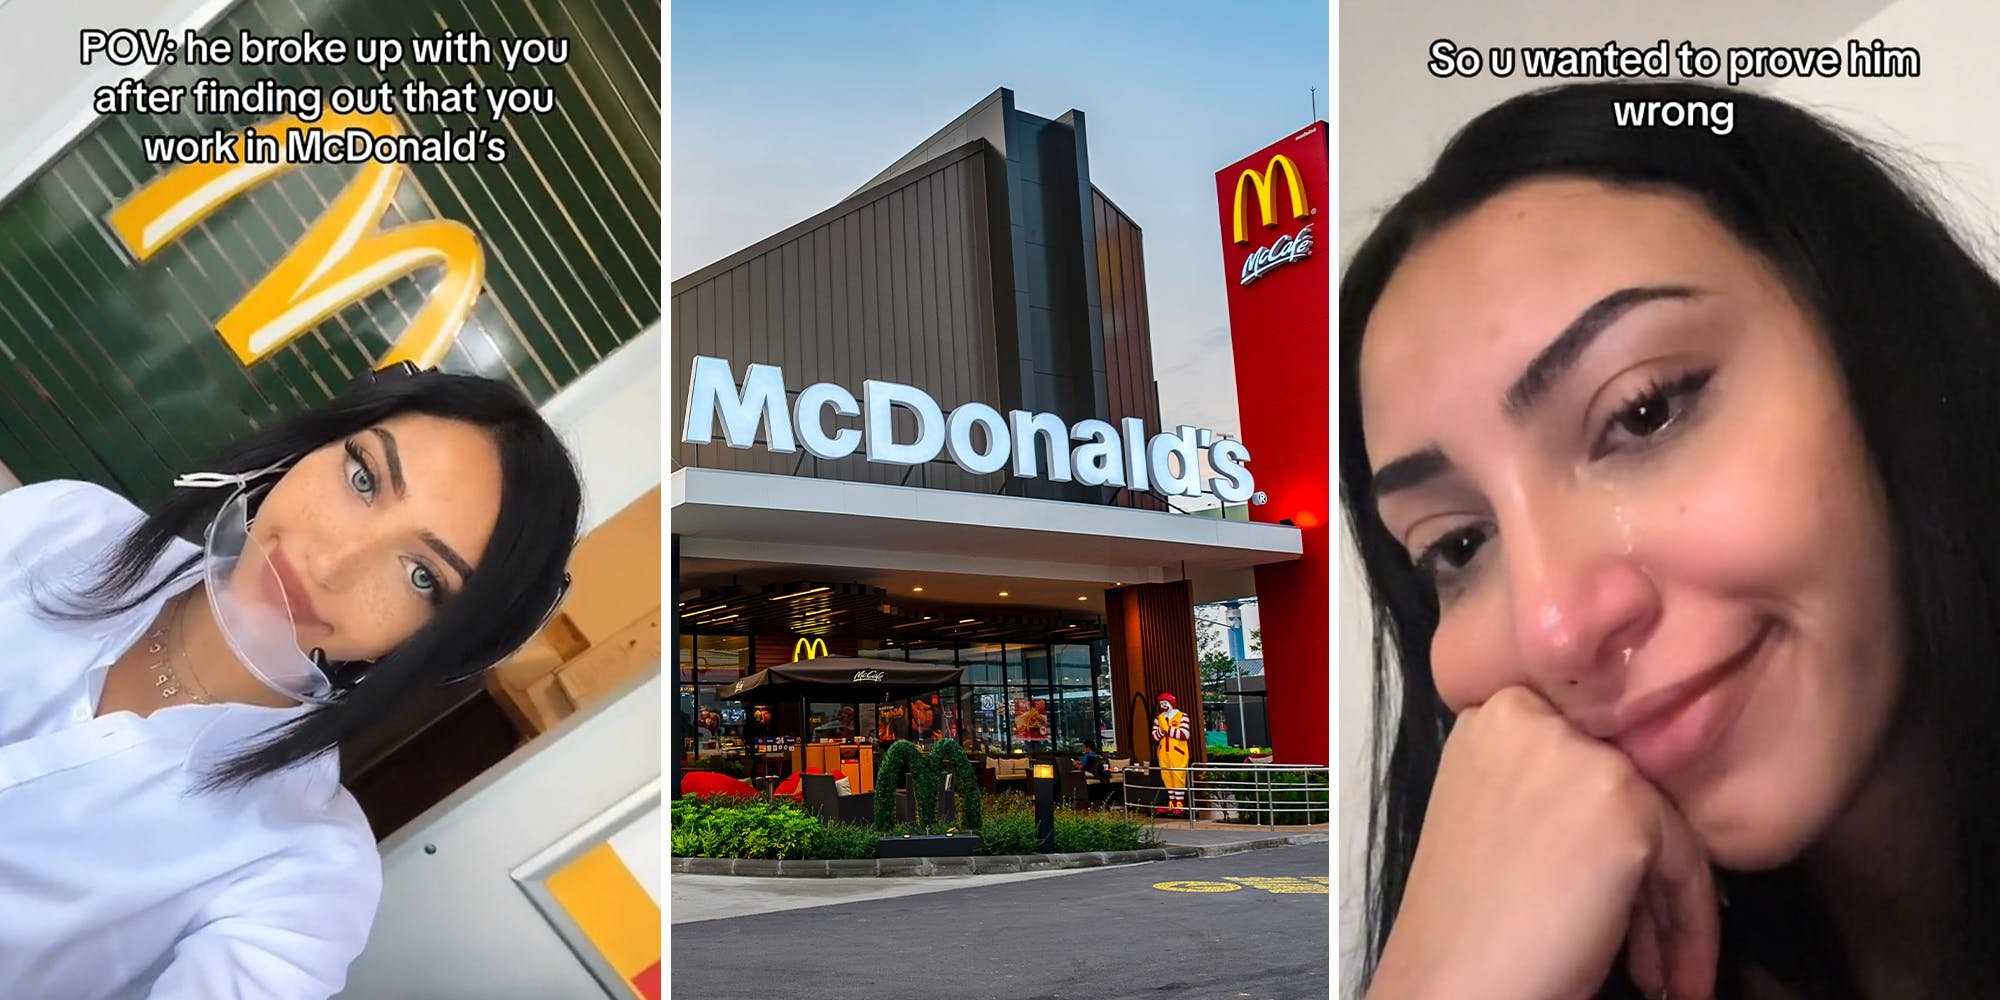 ‘Wanted to prove him wrong’: Woman says boyfriend broke up with her after finding out she works at McDonald’s. She tried to get revenge